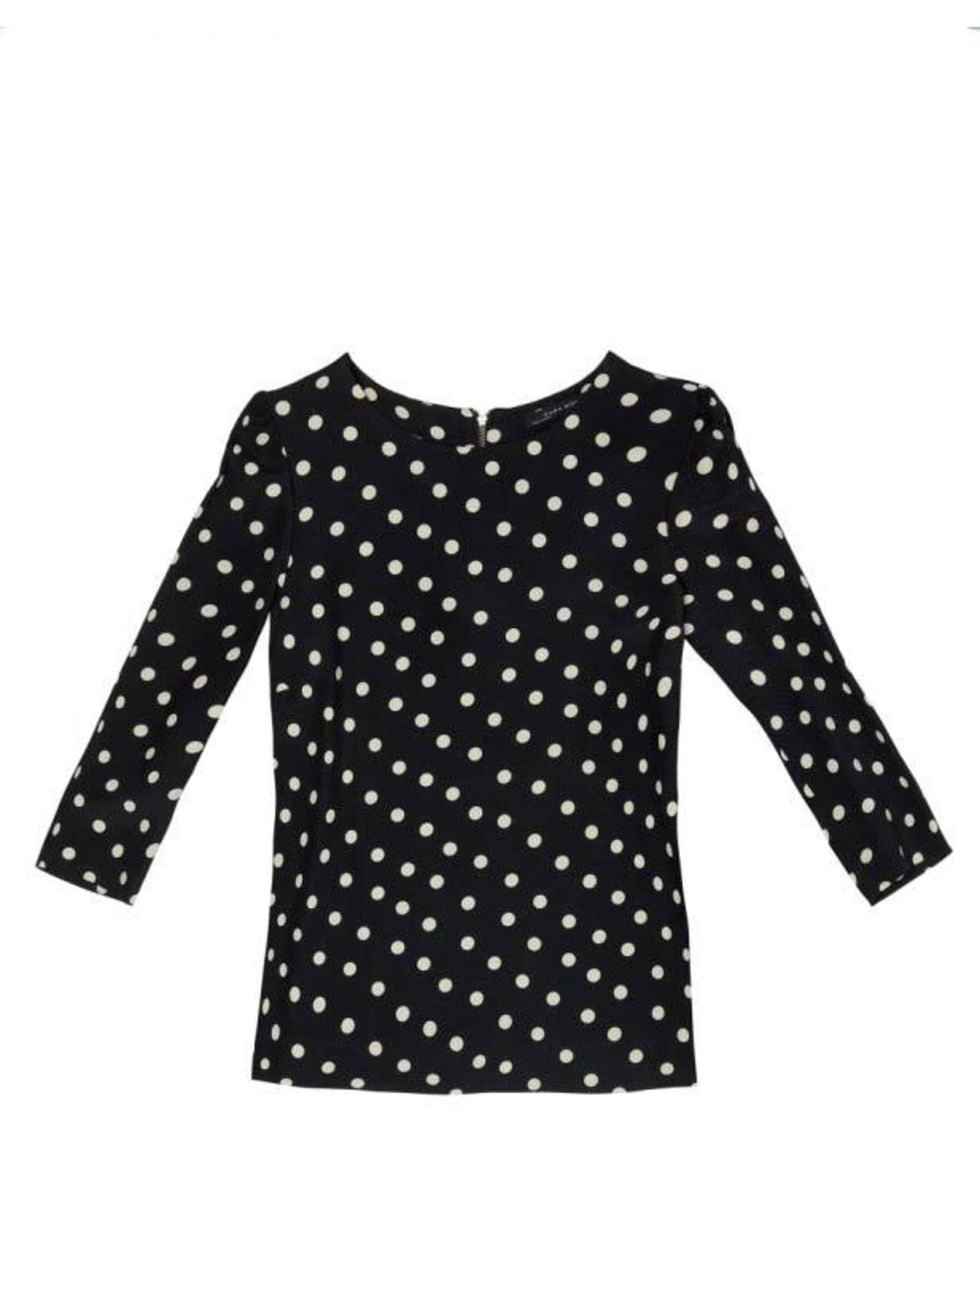 <p>Polka dots are one of our favourite year-round prints so wear this top with a leather skirt now, or chinos come spring <a href="http://www.zara.com/webapp/wcs/stores/servlet/product/uk/en/zara-S2011/61142/298512/TOP%2BWITH%2BGATHERED%2BSHOULDERS">Zara